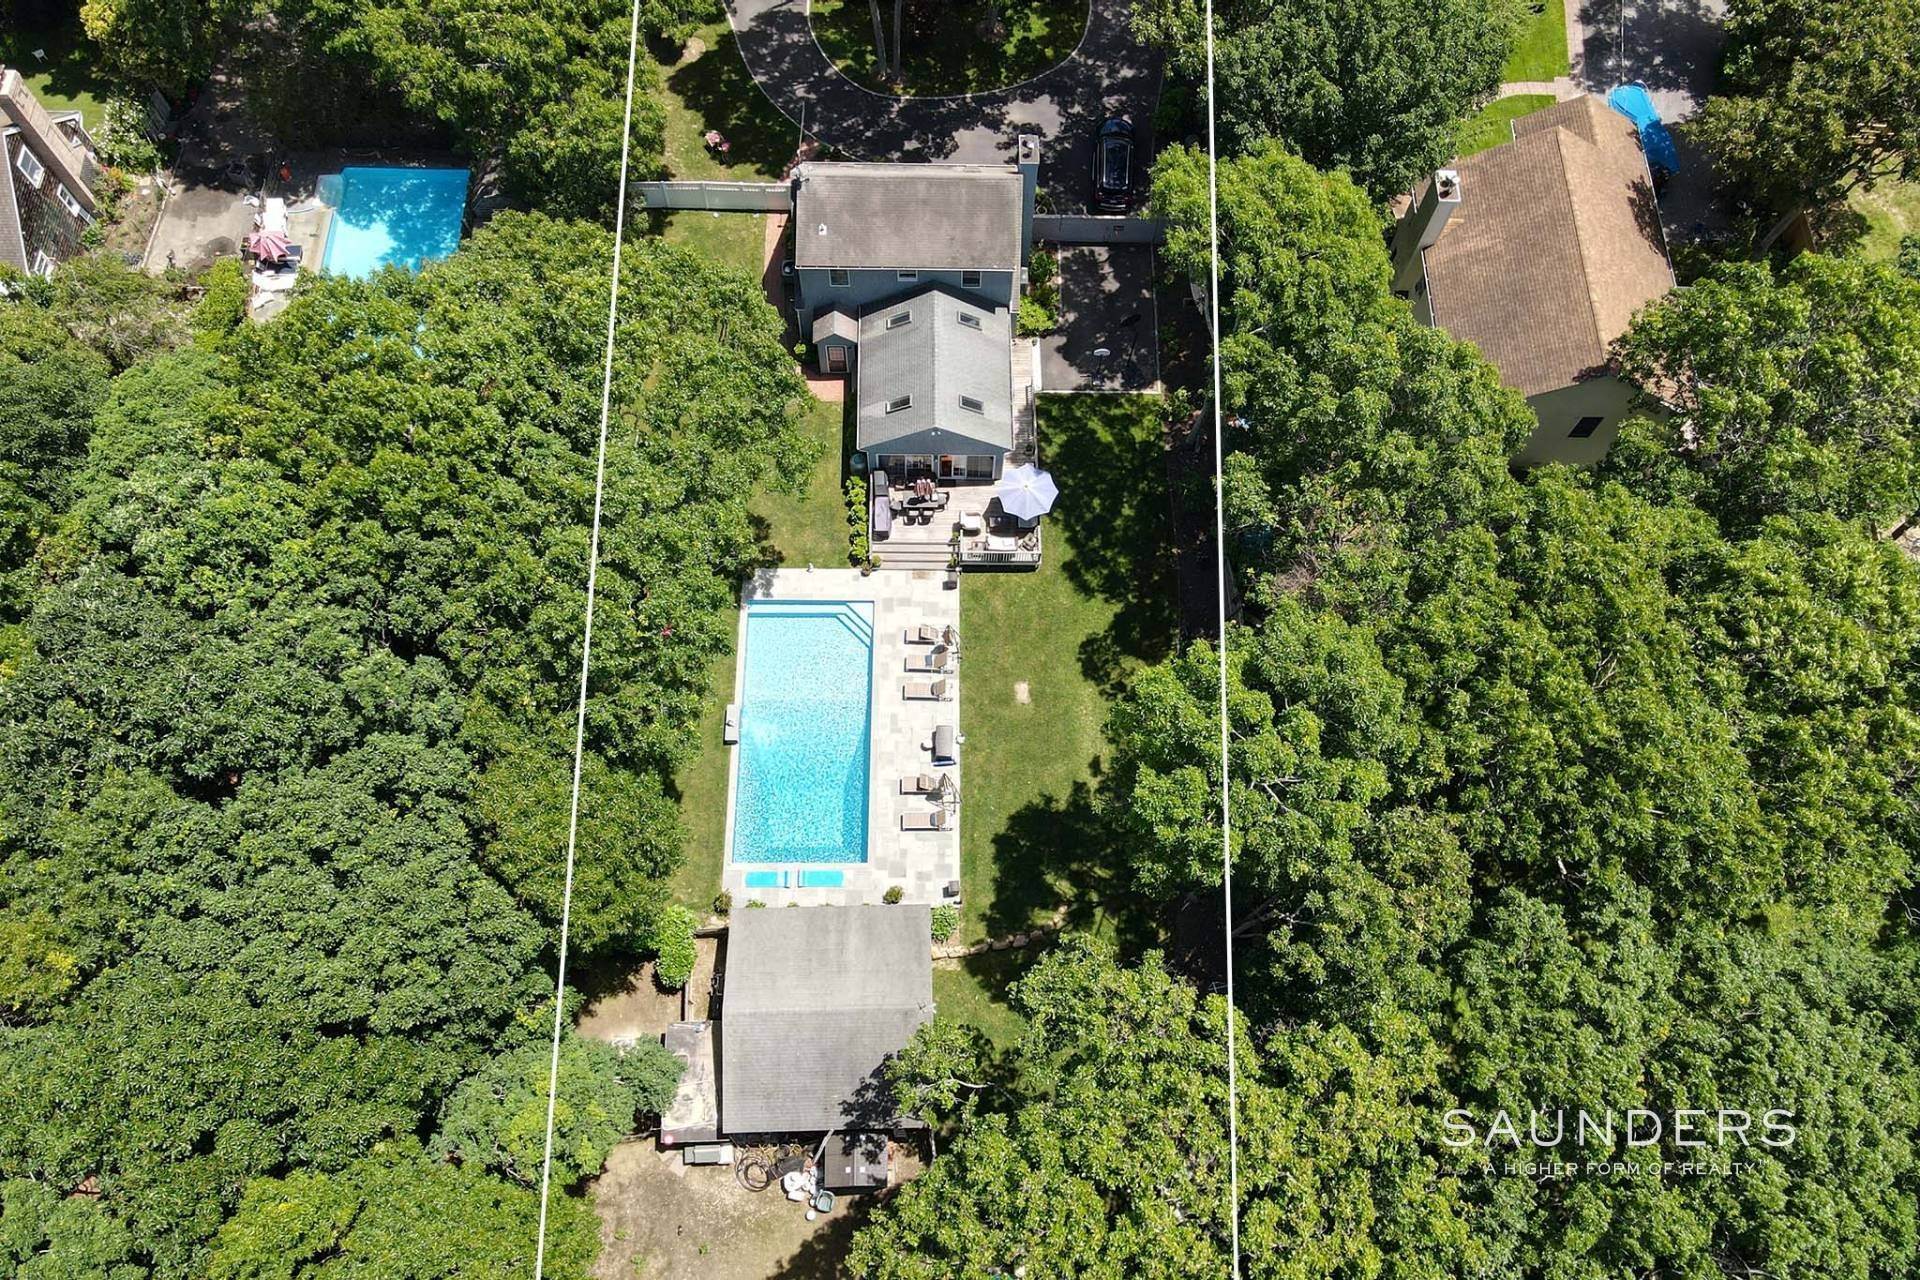 Single Family Homes for Sale at Mint Condition Cape With Pool 5 Gordon Street, East Hampton, NY 11937